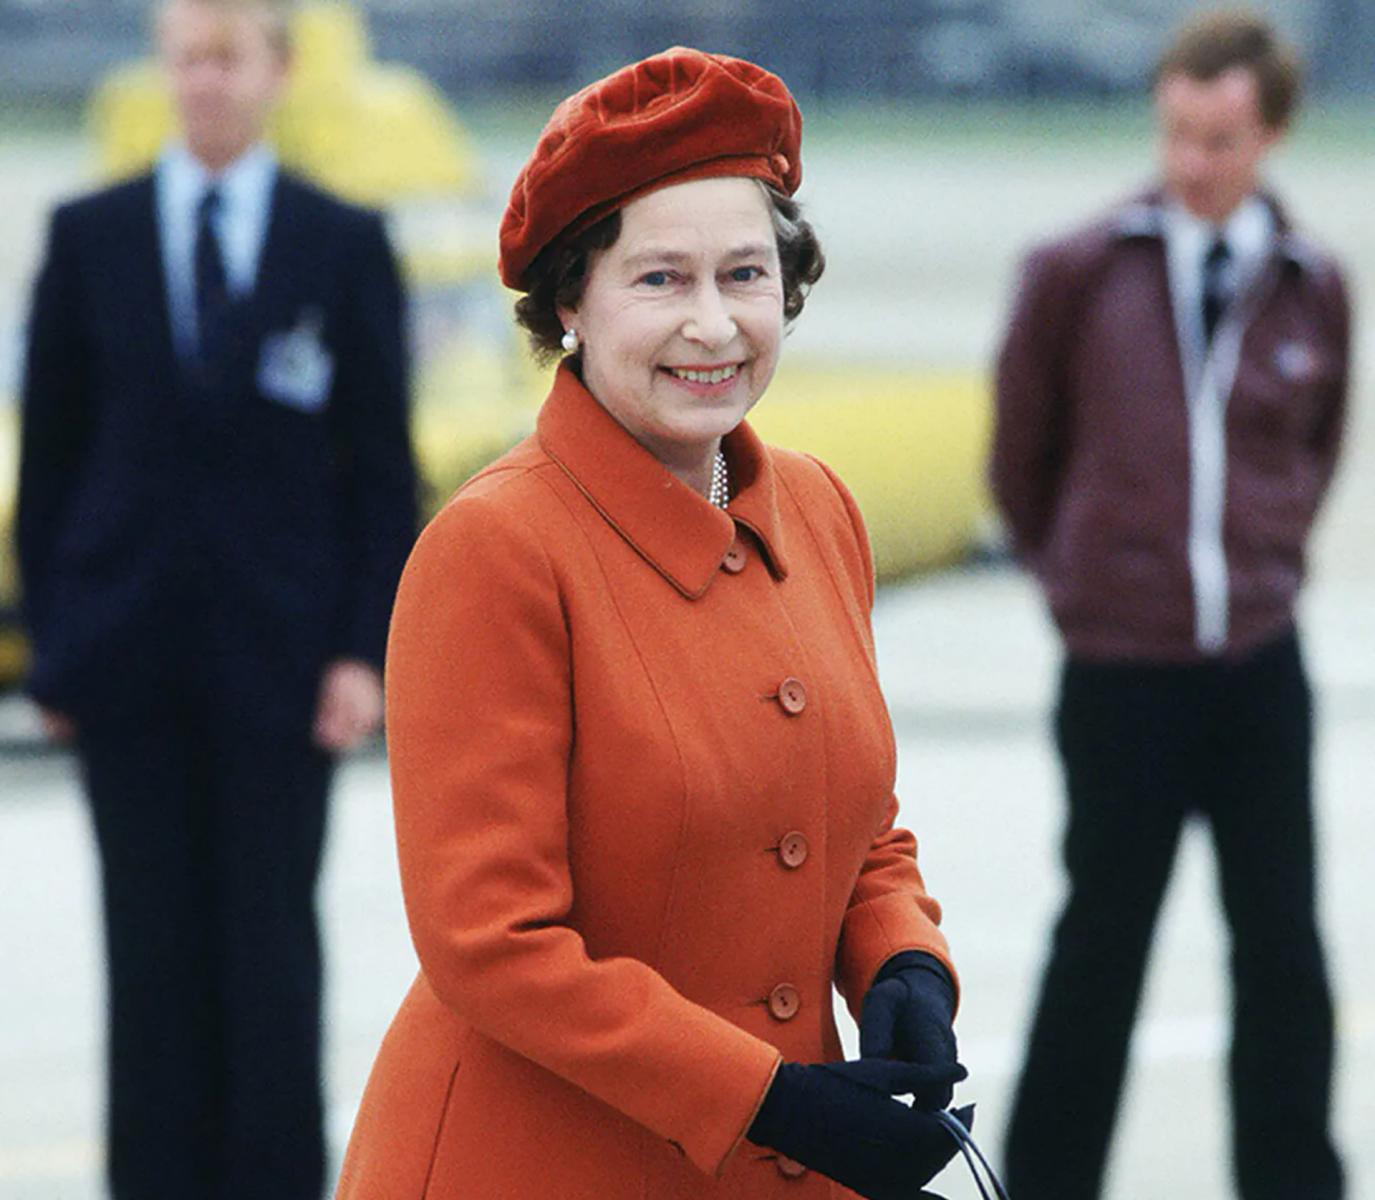 7 Facts About Elizabeth II That She Wouldn’t Want You To Know - image 1